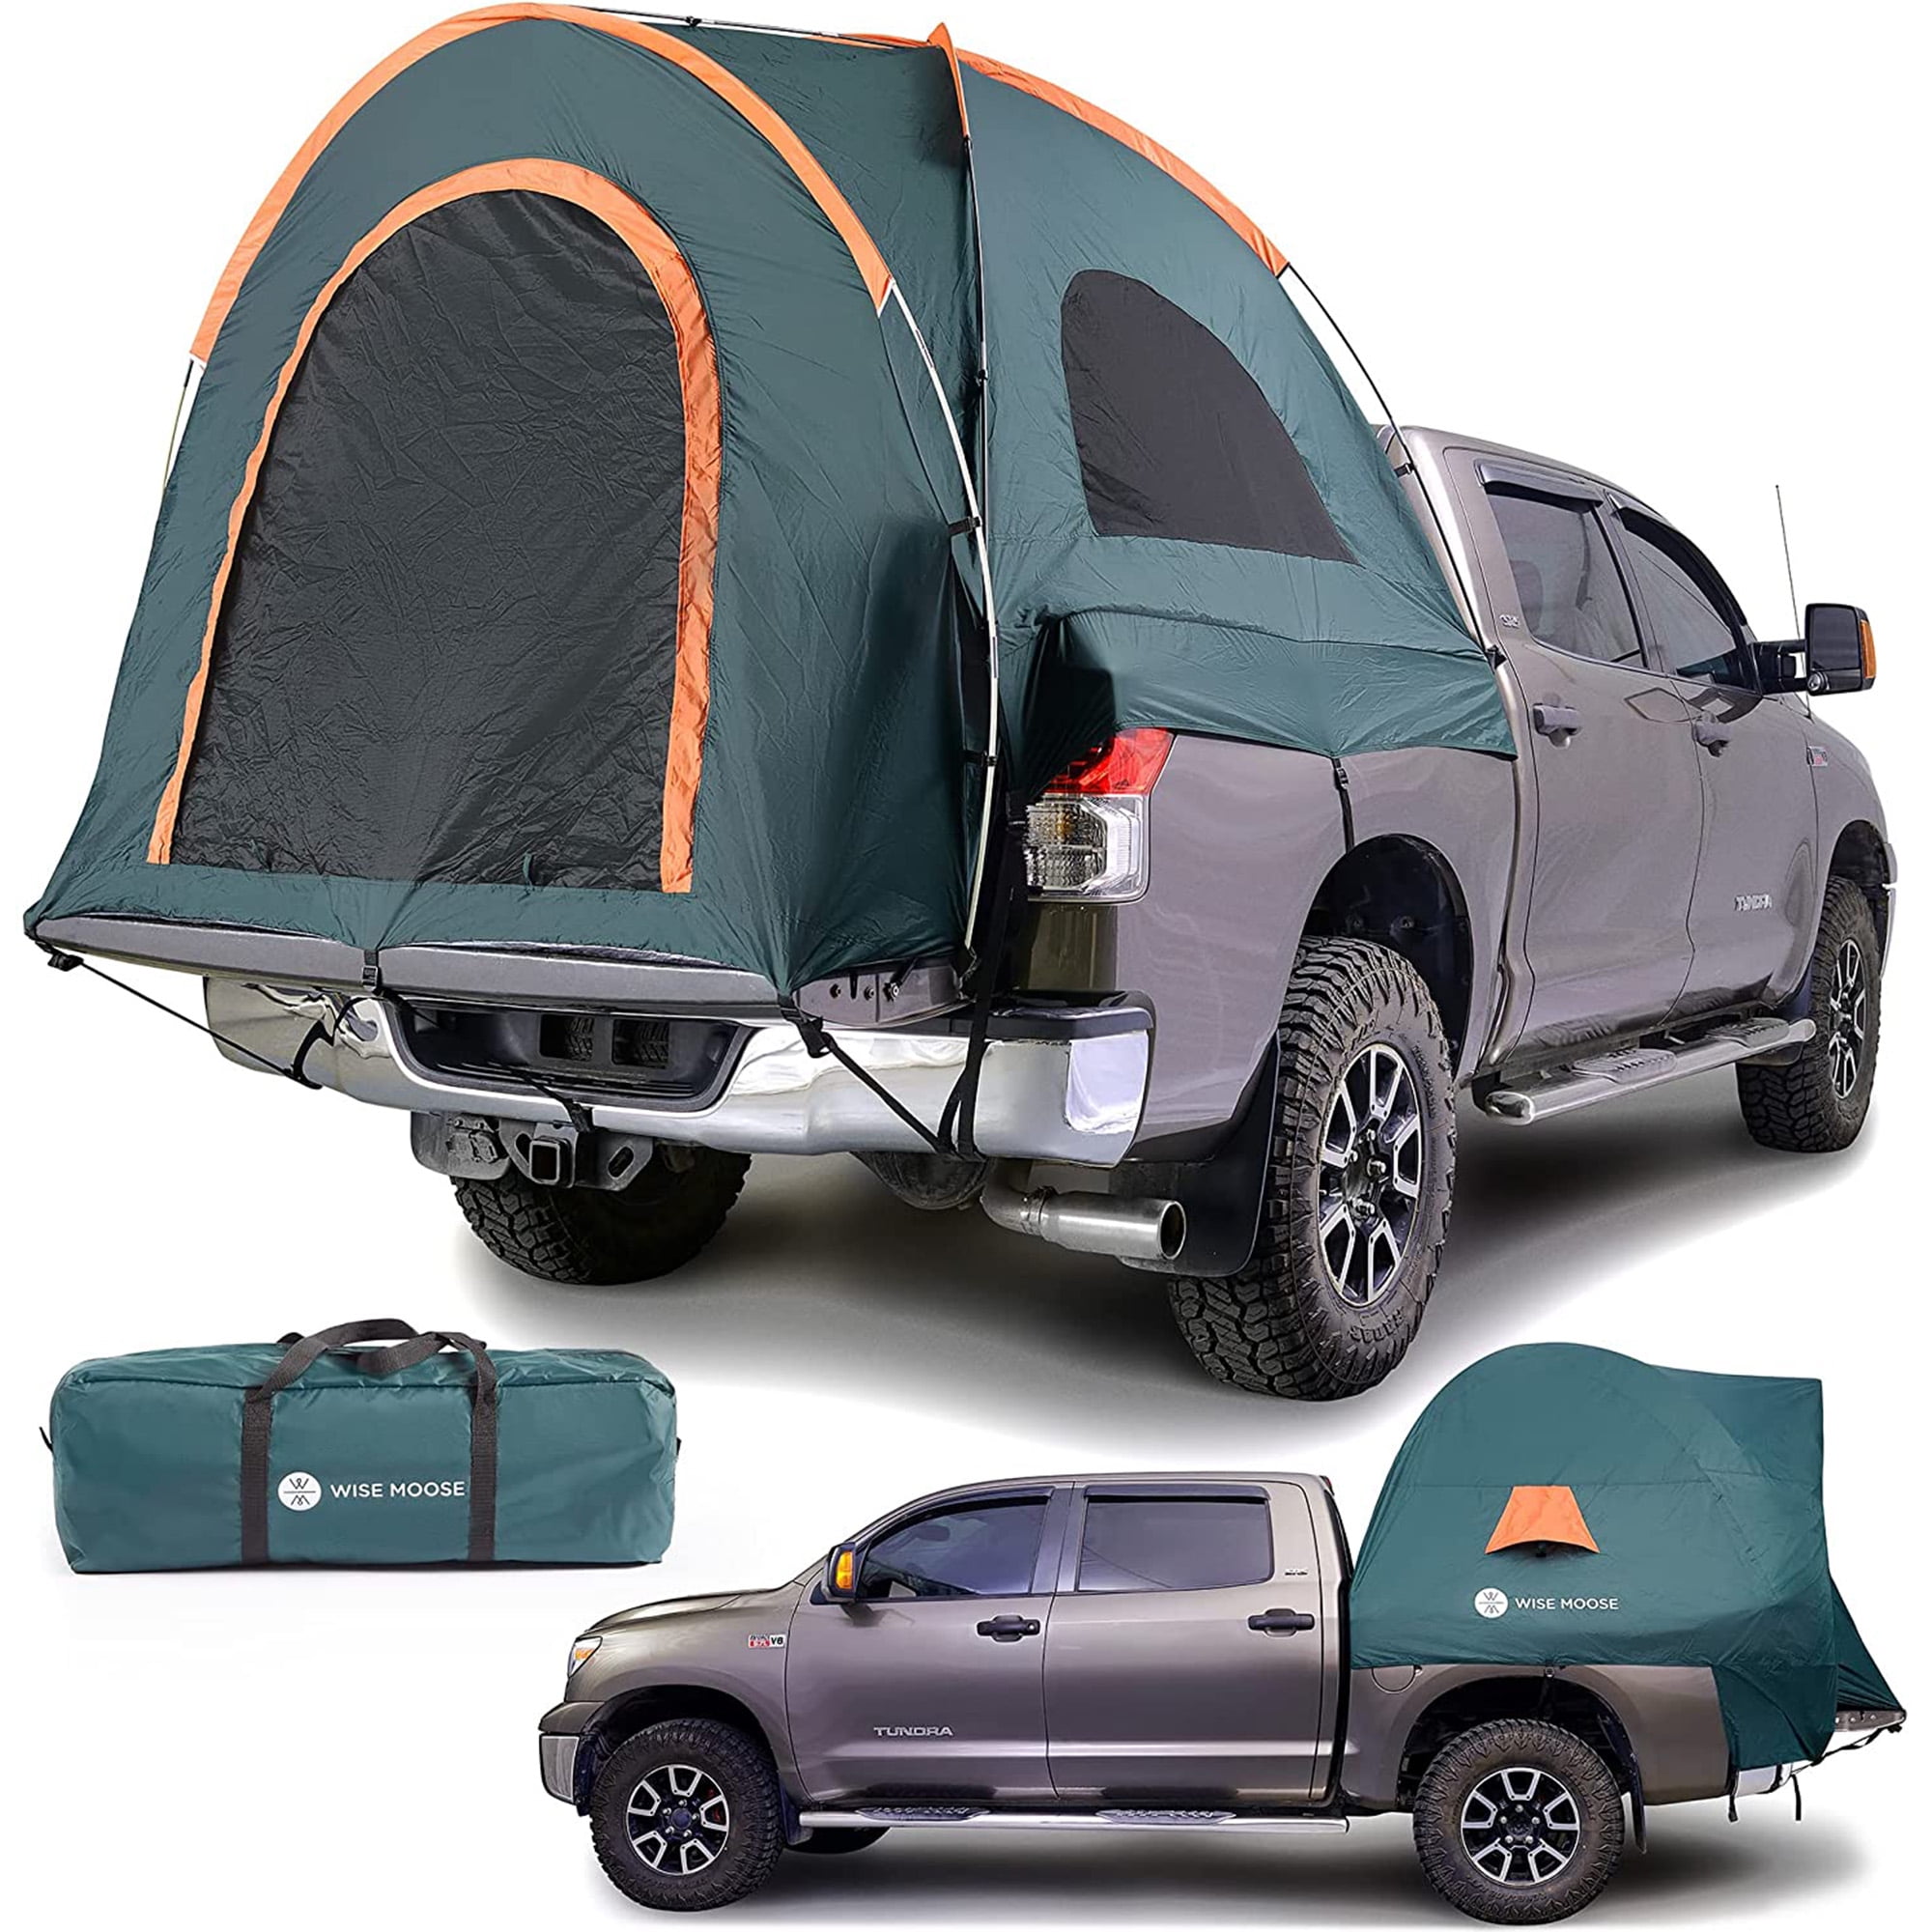 Wise Moose Truck Tent - Waterproof & Windproof 6.3x6.6 ft Truck Bed for  Camping